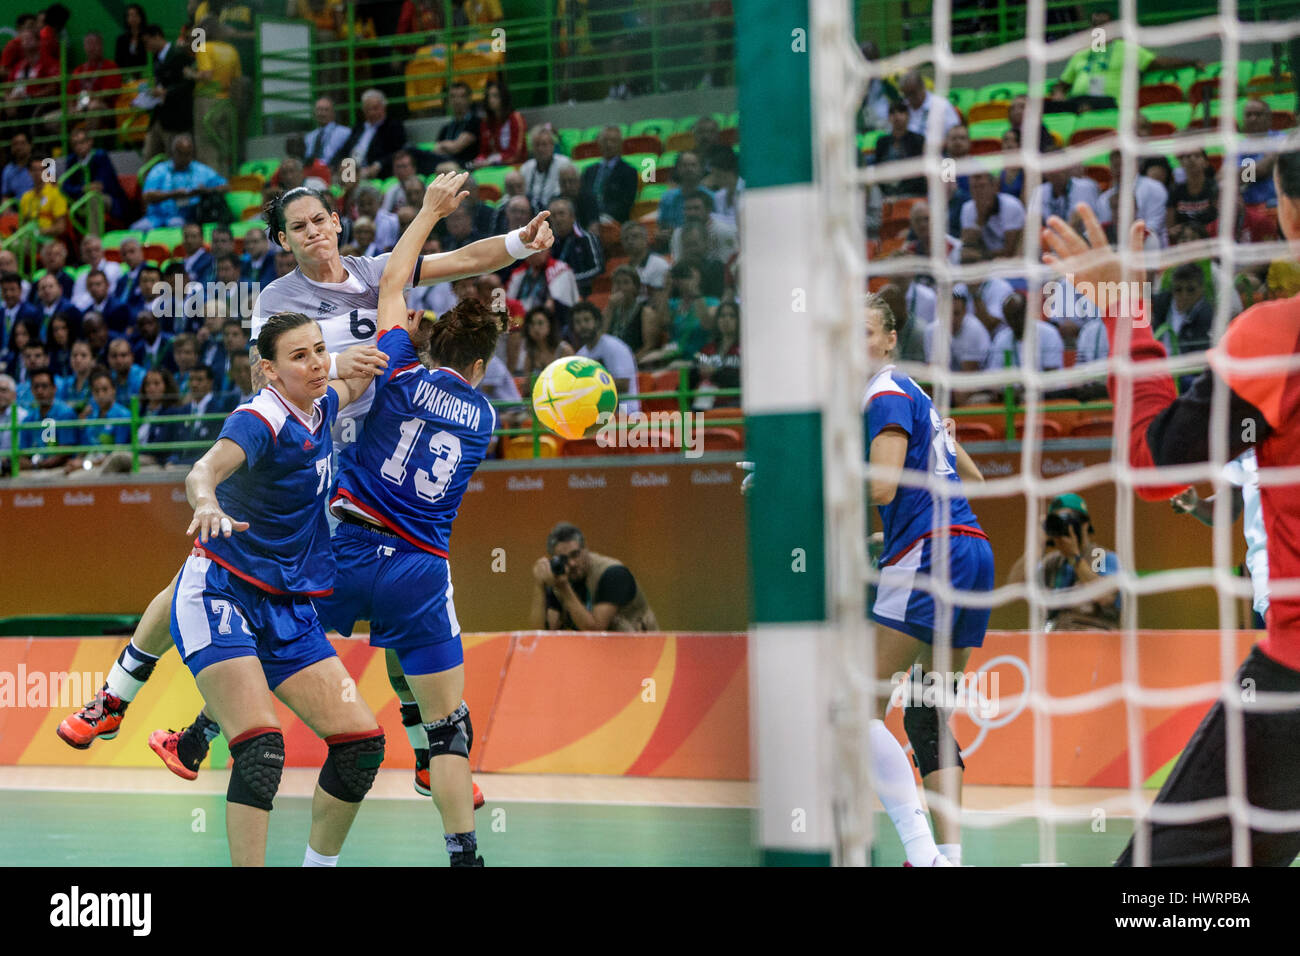 Rio de Janeiro, Brazil. 20 August 2016 Alexandra Lacrabère (FRA) competes in the women's handball gold medal match Russia vs. France at the 2016 Olymp Stock Photo